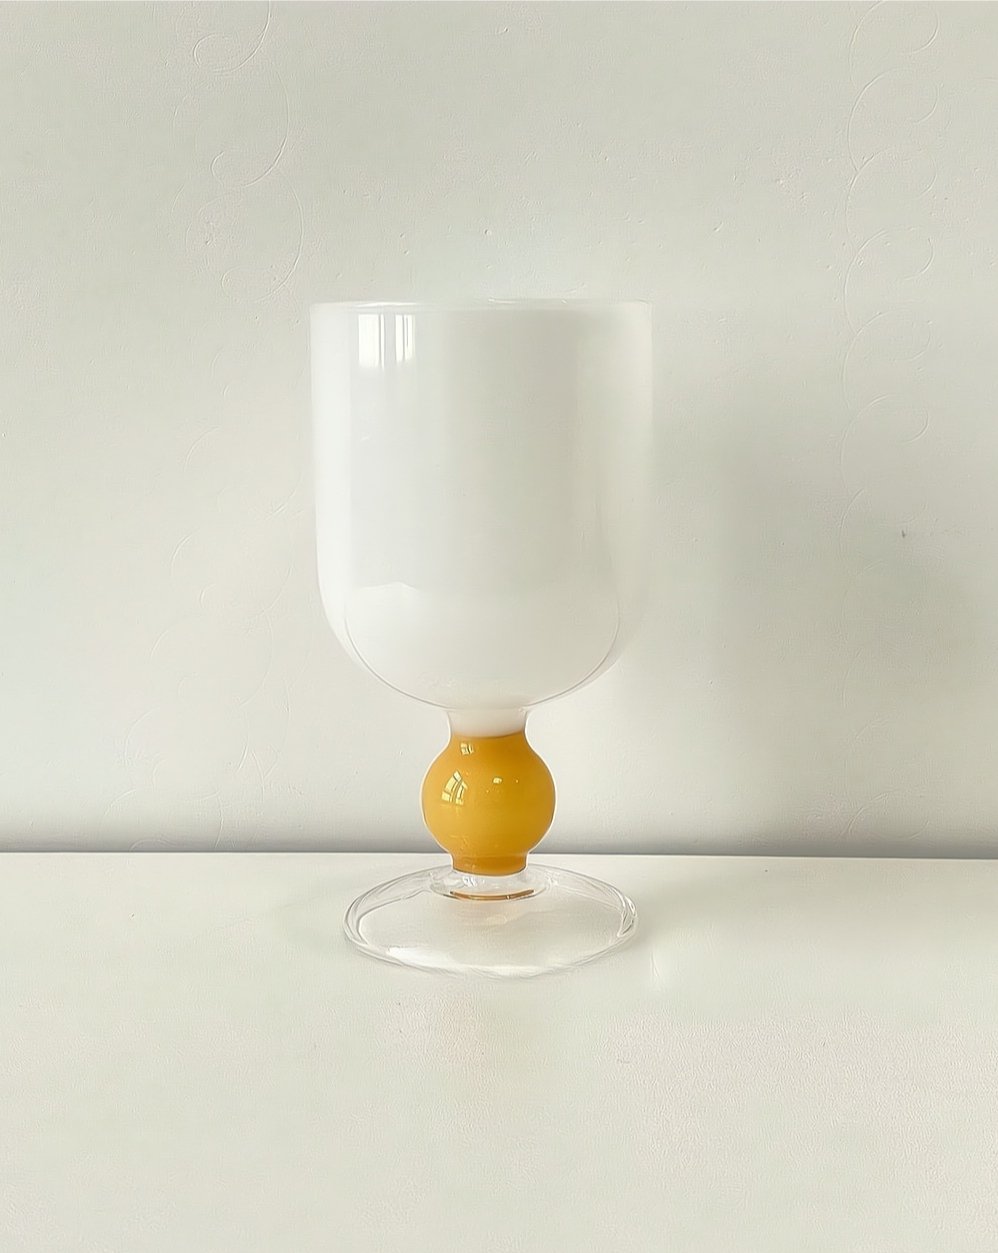 Creamy Jawbreaker Candy Wine Glasses Set of 2 ( $21.9 Each ) - Creamy Jawbreaker Candy Wine Glasses Set-Mango - INSPECIAL HOME